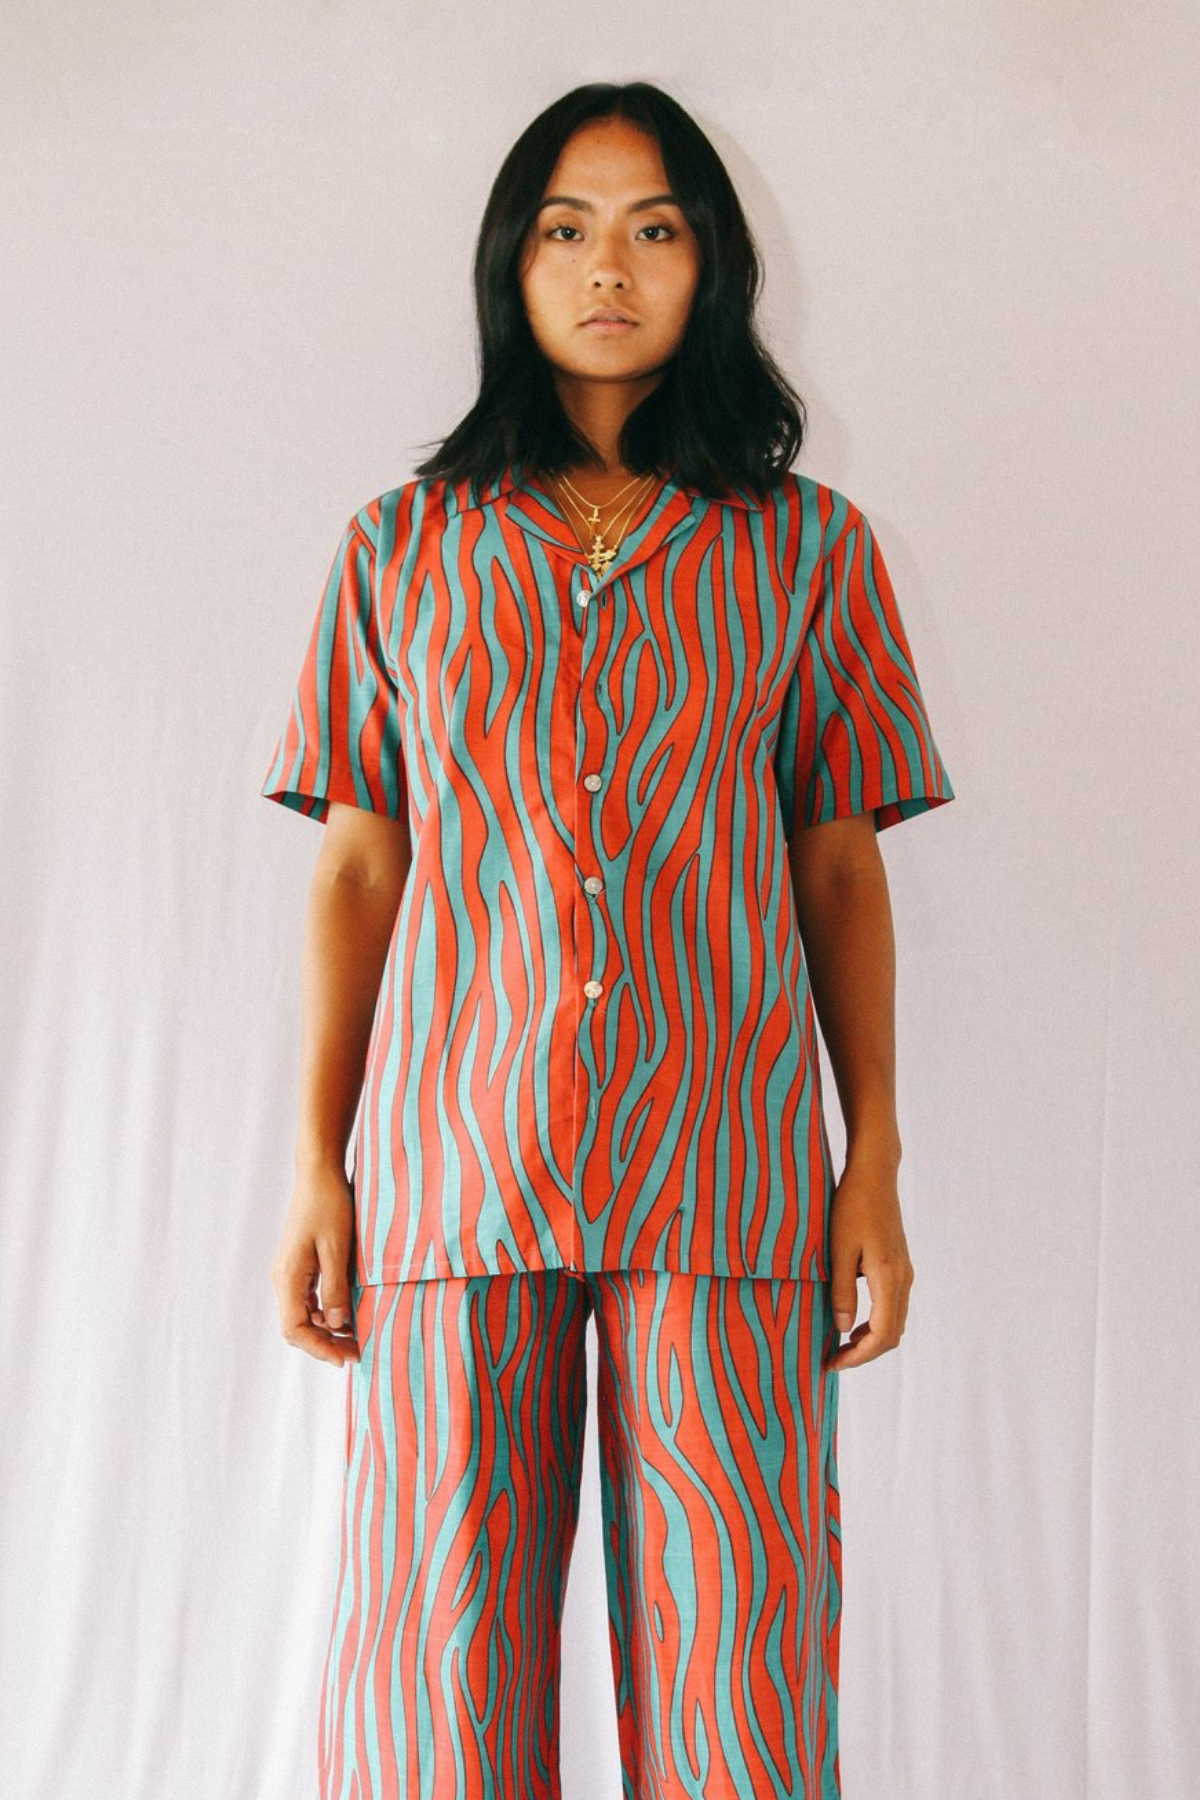 Stain Ringo Shirt in Acid, available in ZERRIN